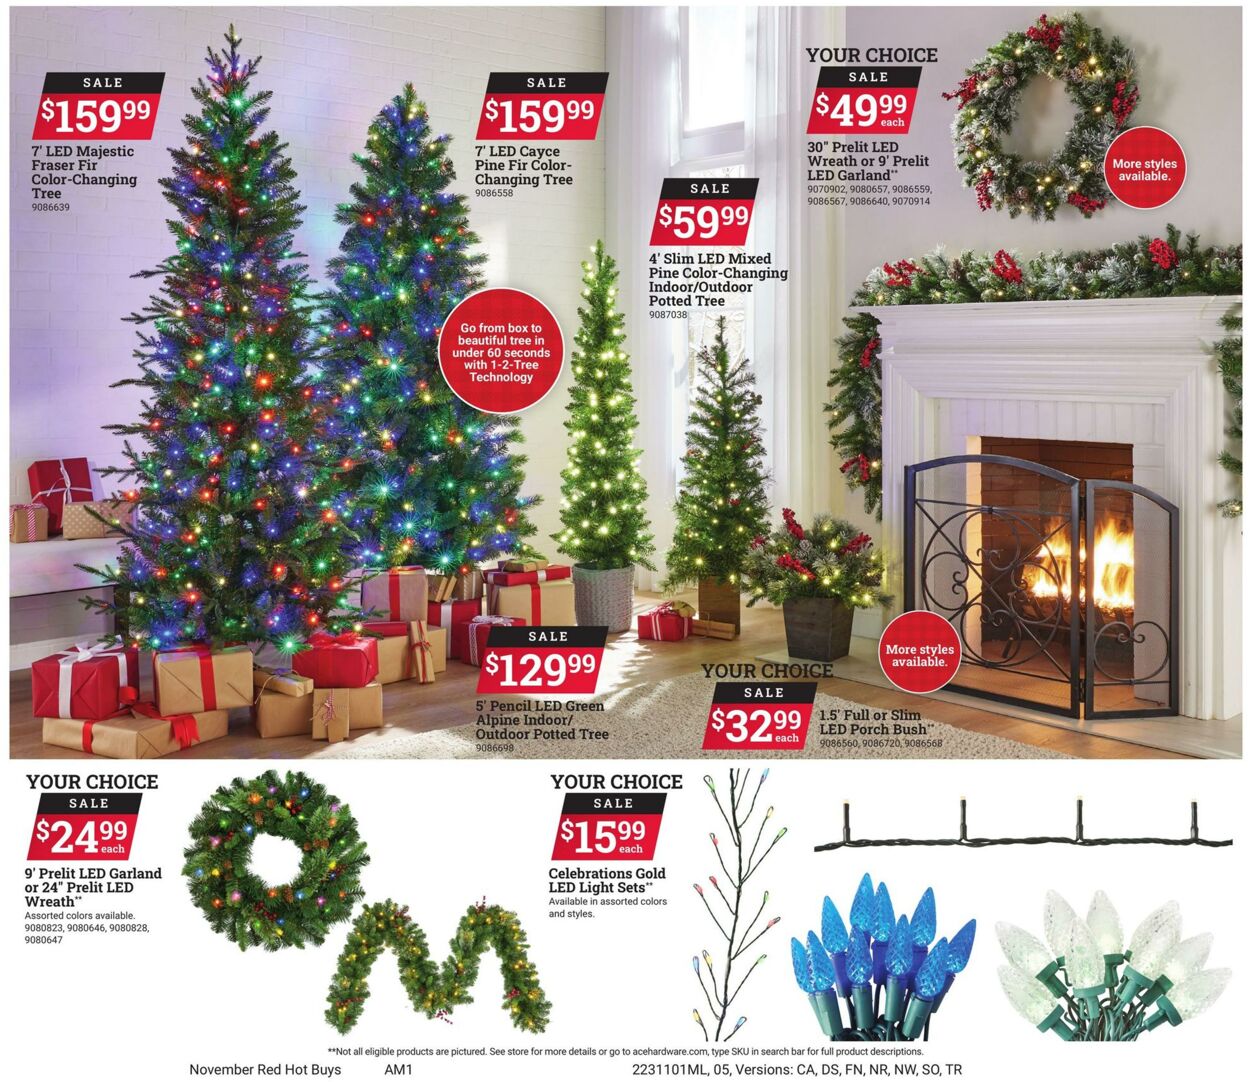 Ace Hardware Promotional Ad - Valid from 11/01 to 11/30 - Page nb 5 ...